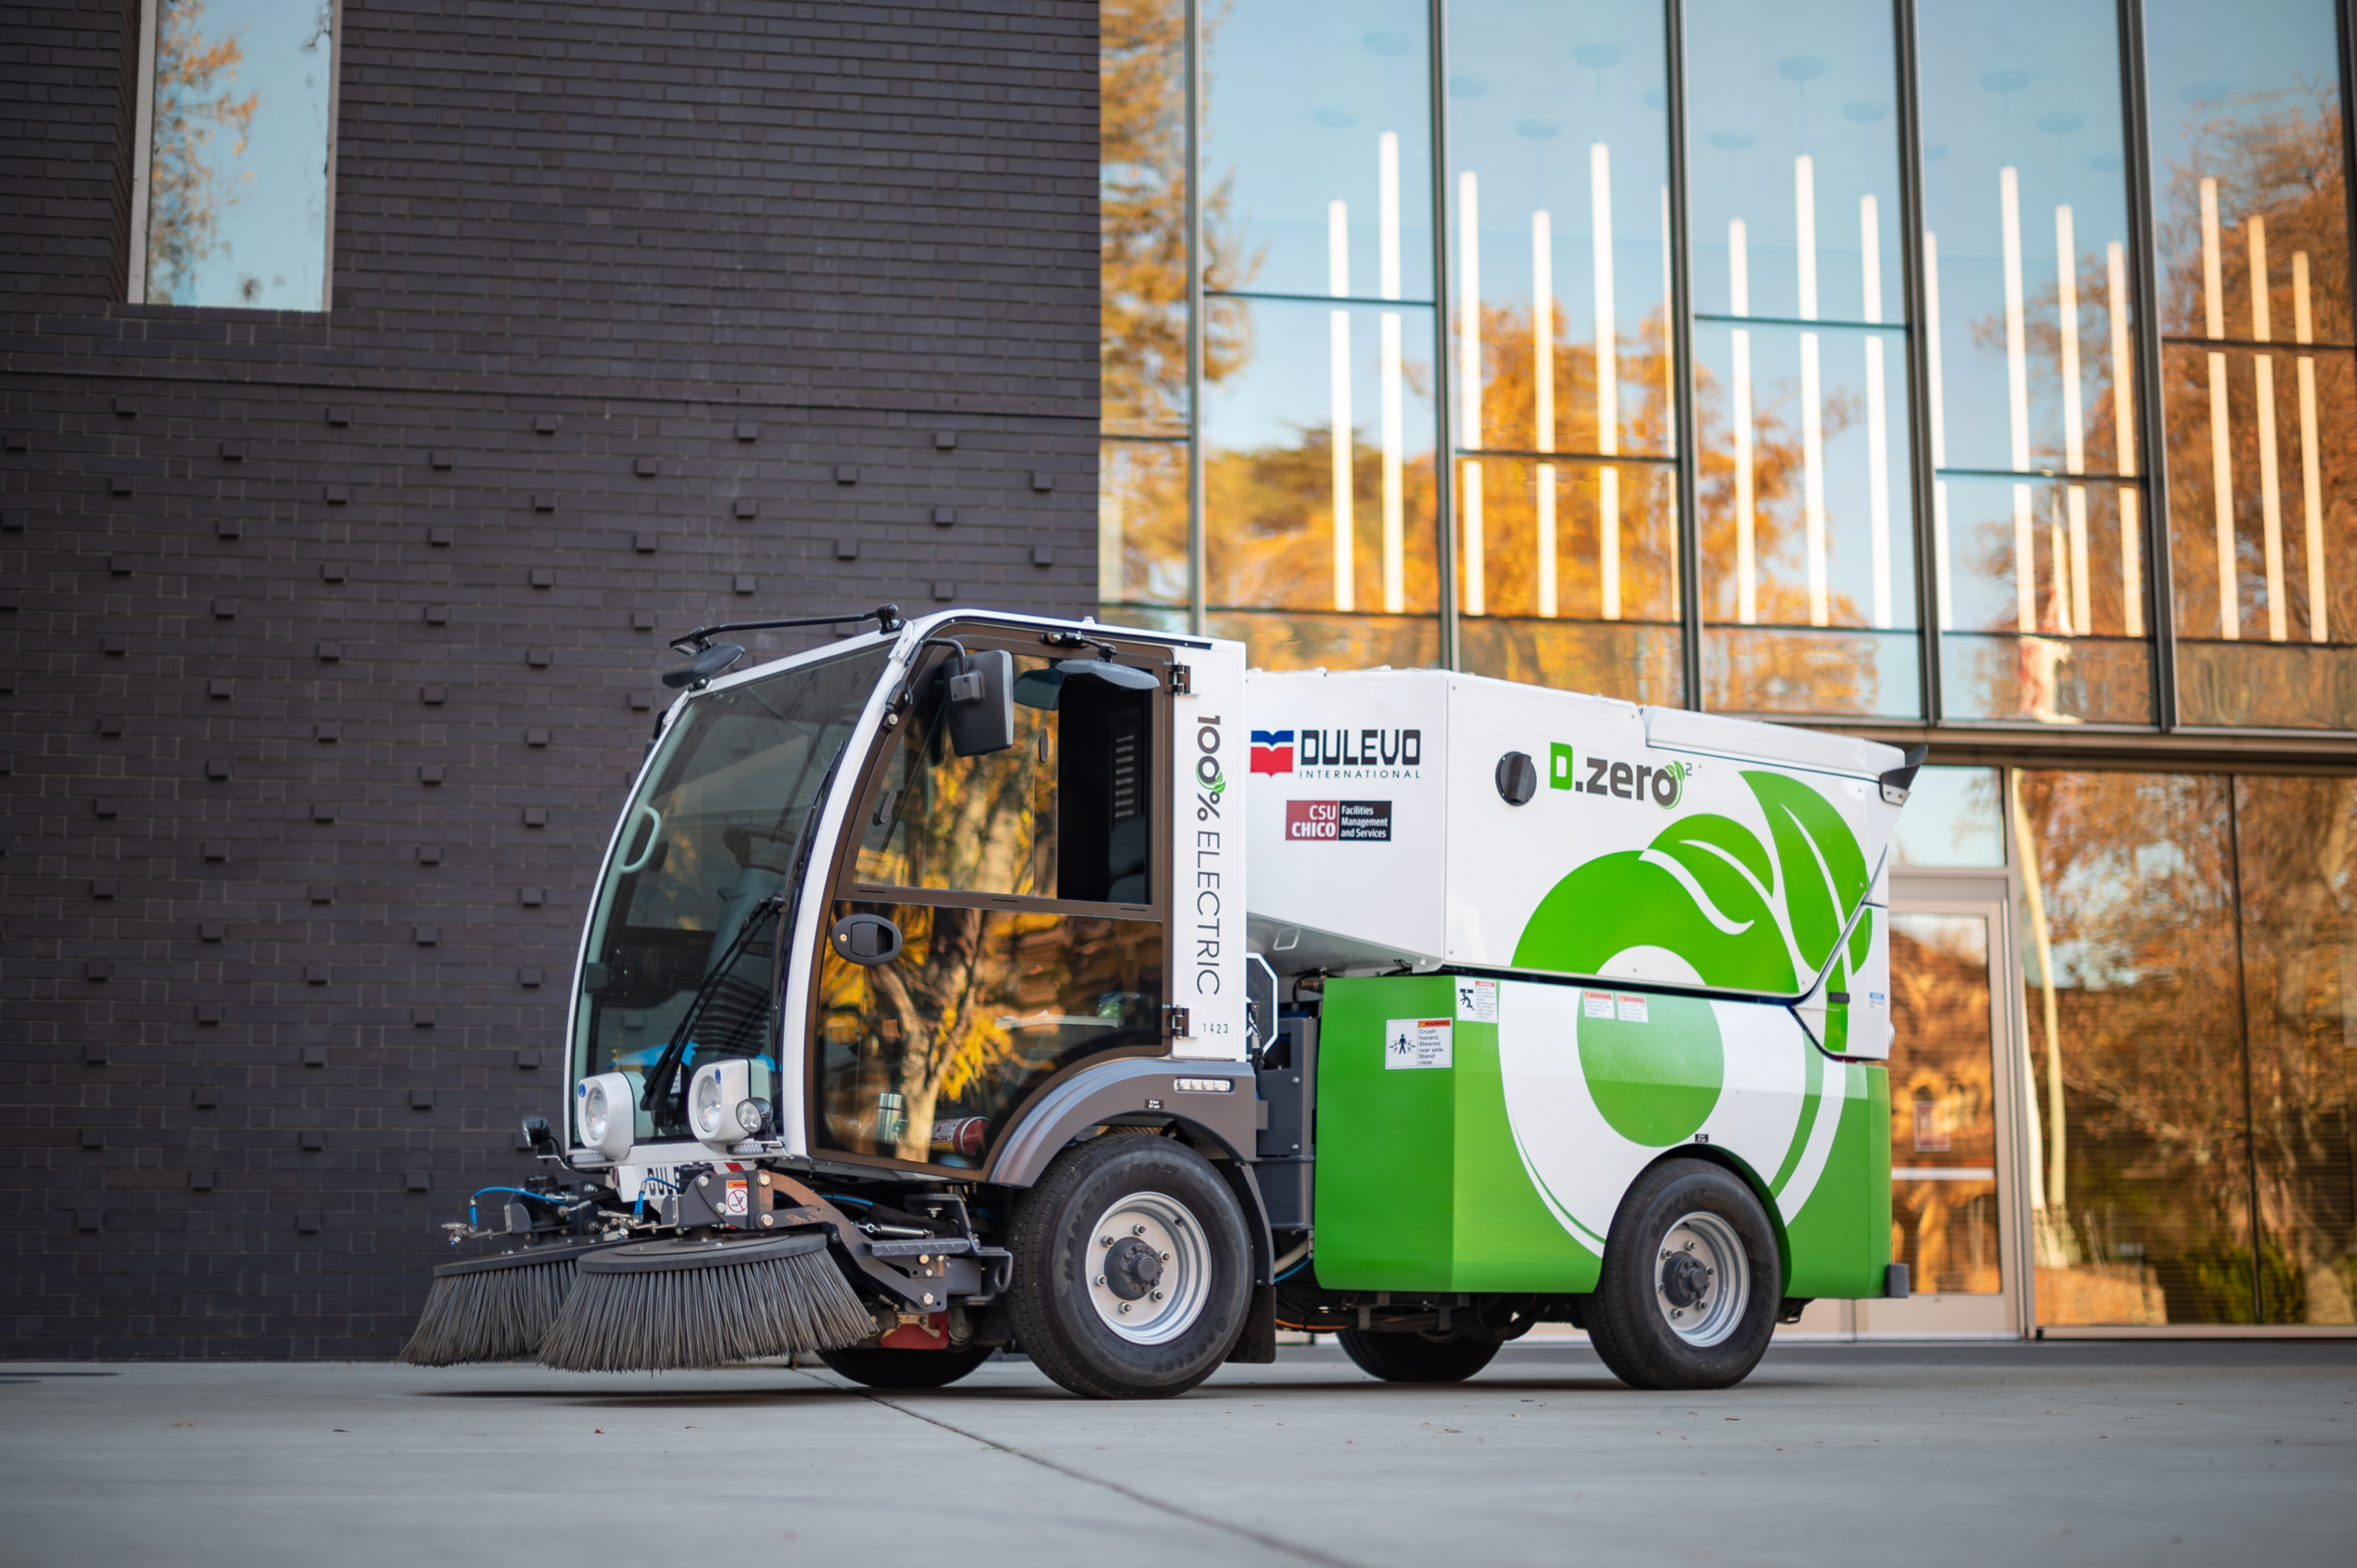 An all-electric street sweeper is parked outside an academic building.